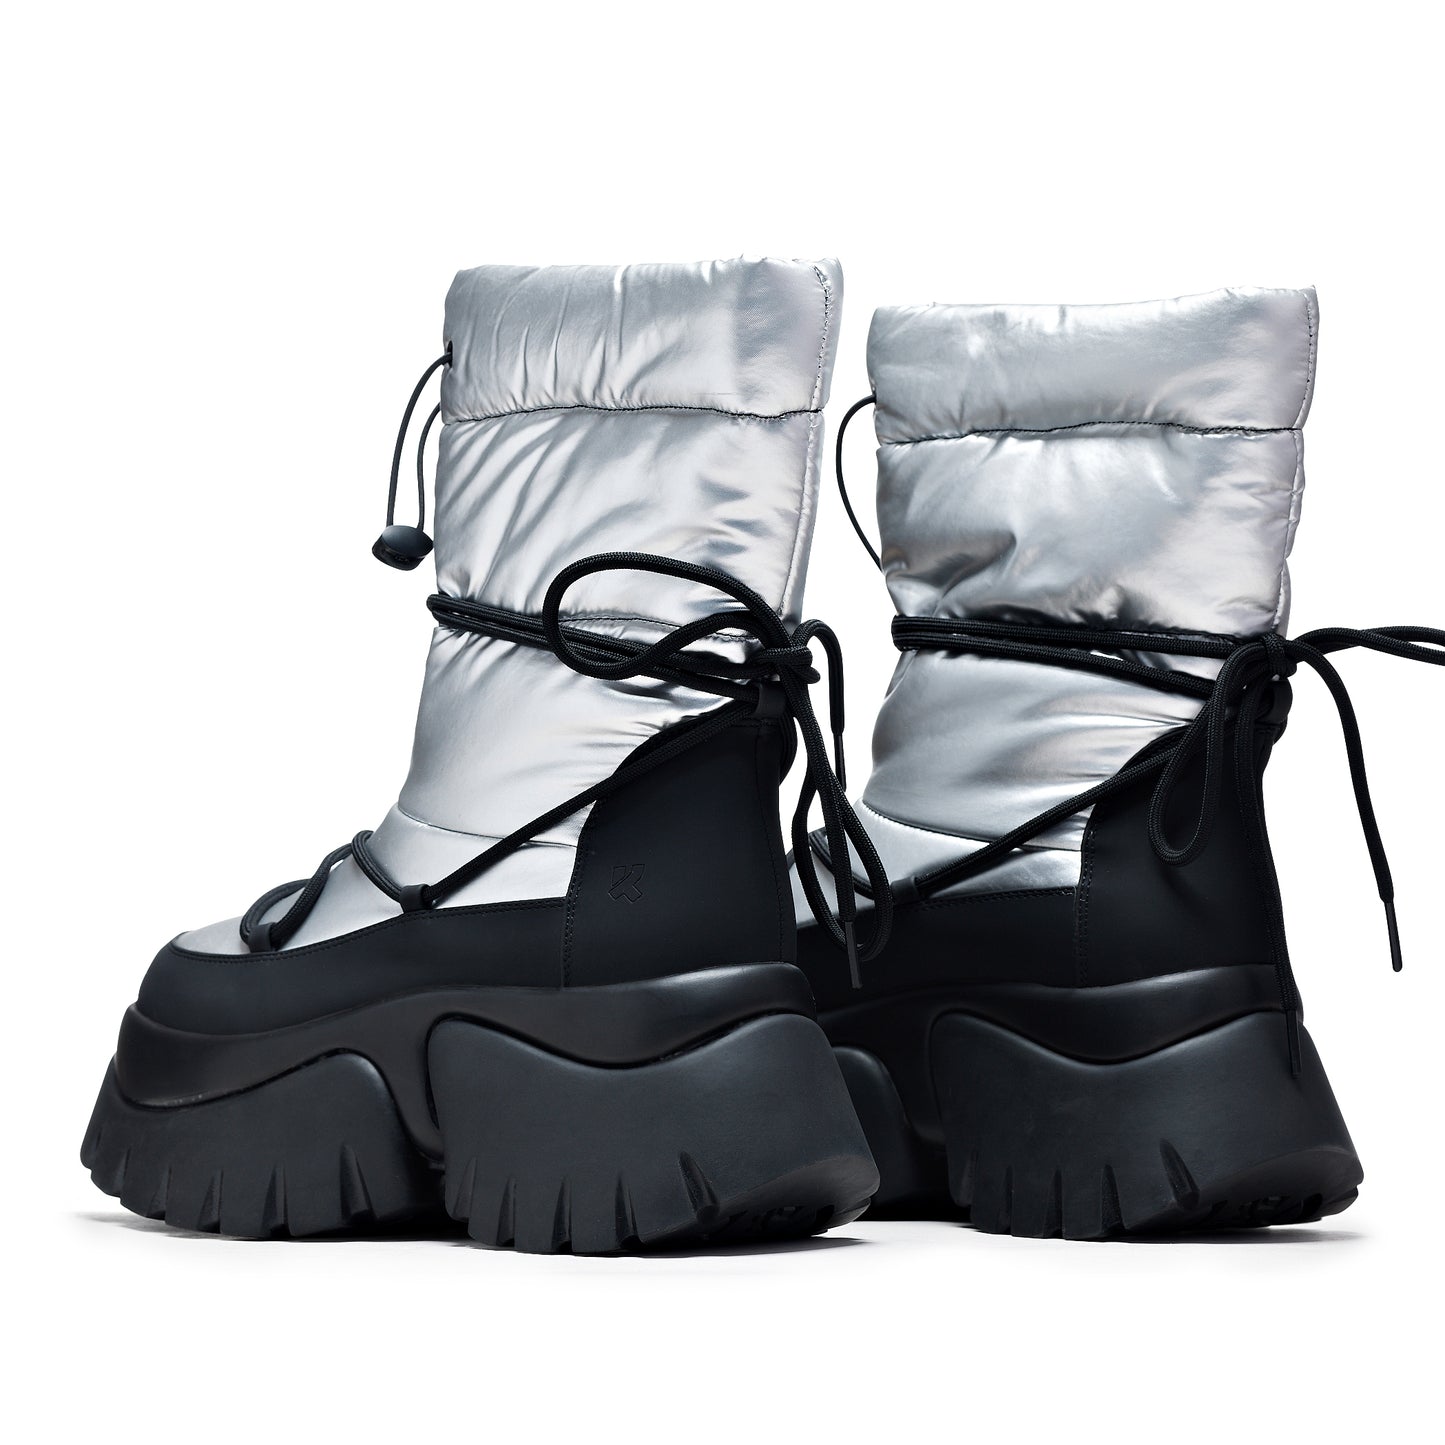 A Glass Mirage Snow Boots - Steel - Ankle Boots - KOI Footwear - Silver - Back View